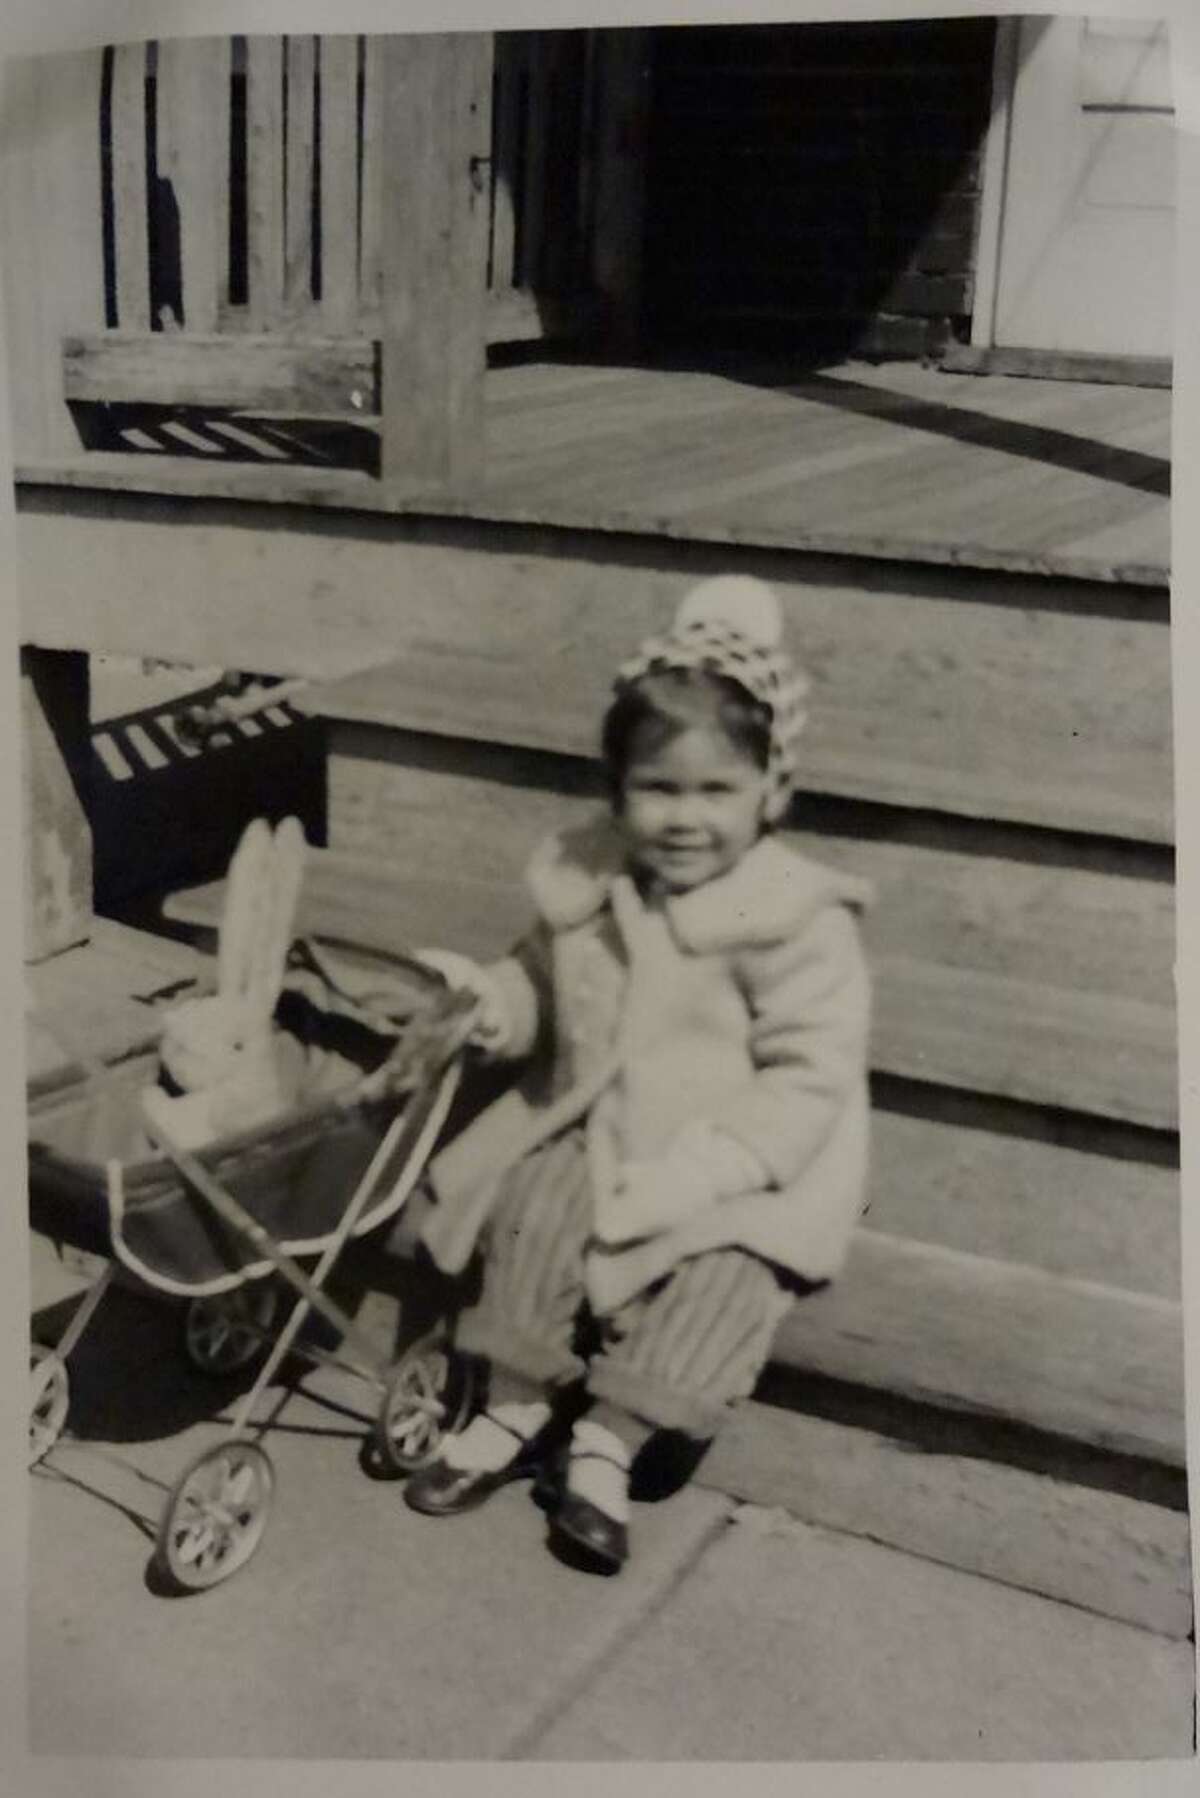 Naomi Shihab Nye with her bunny in a carriage in 1954.